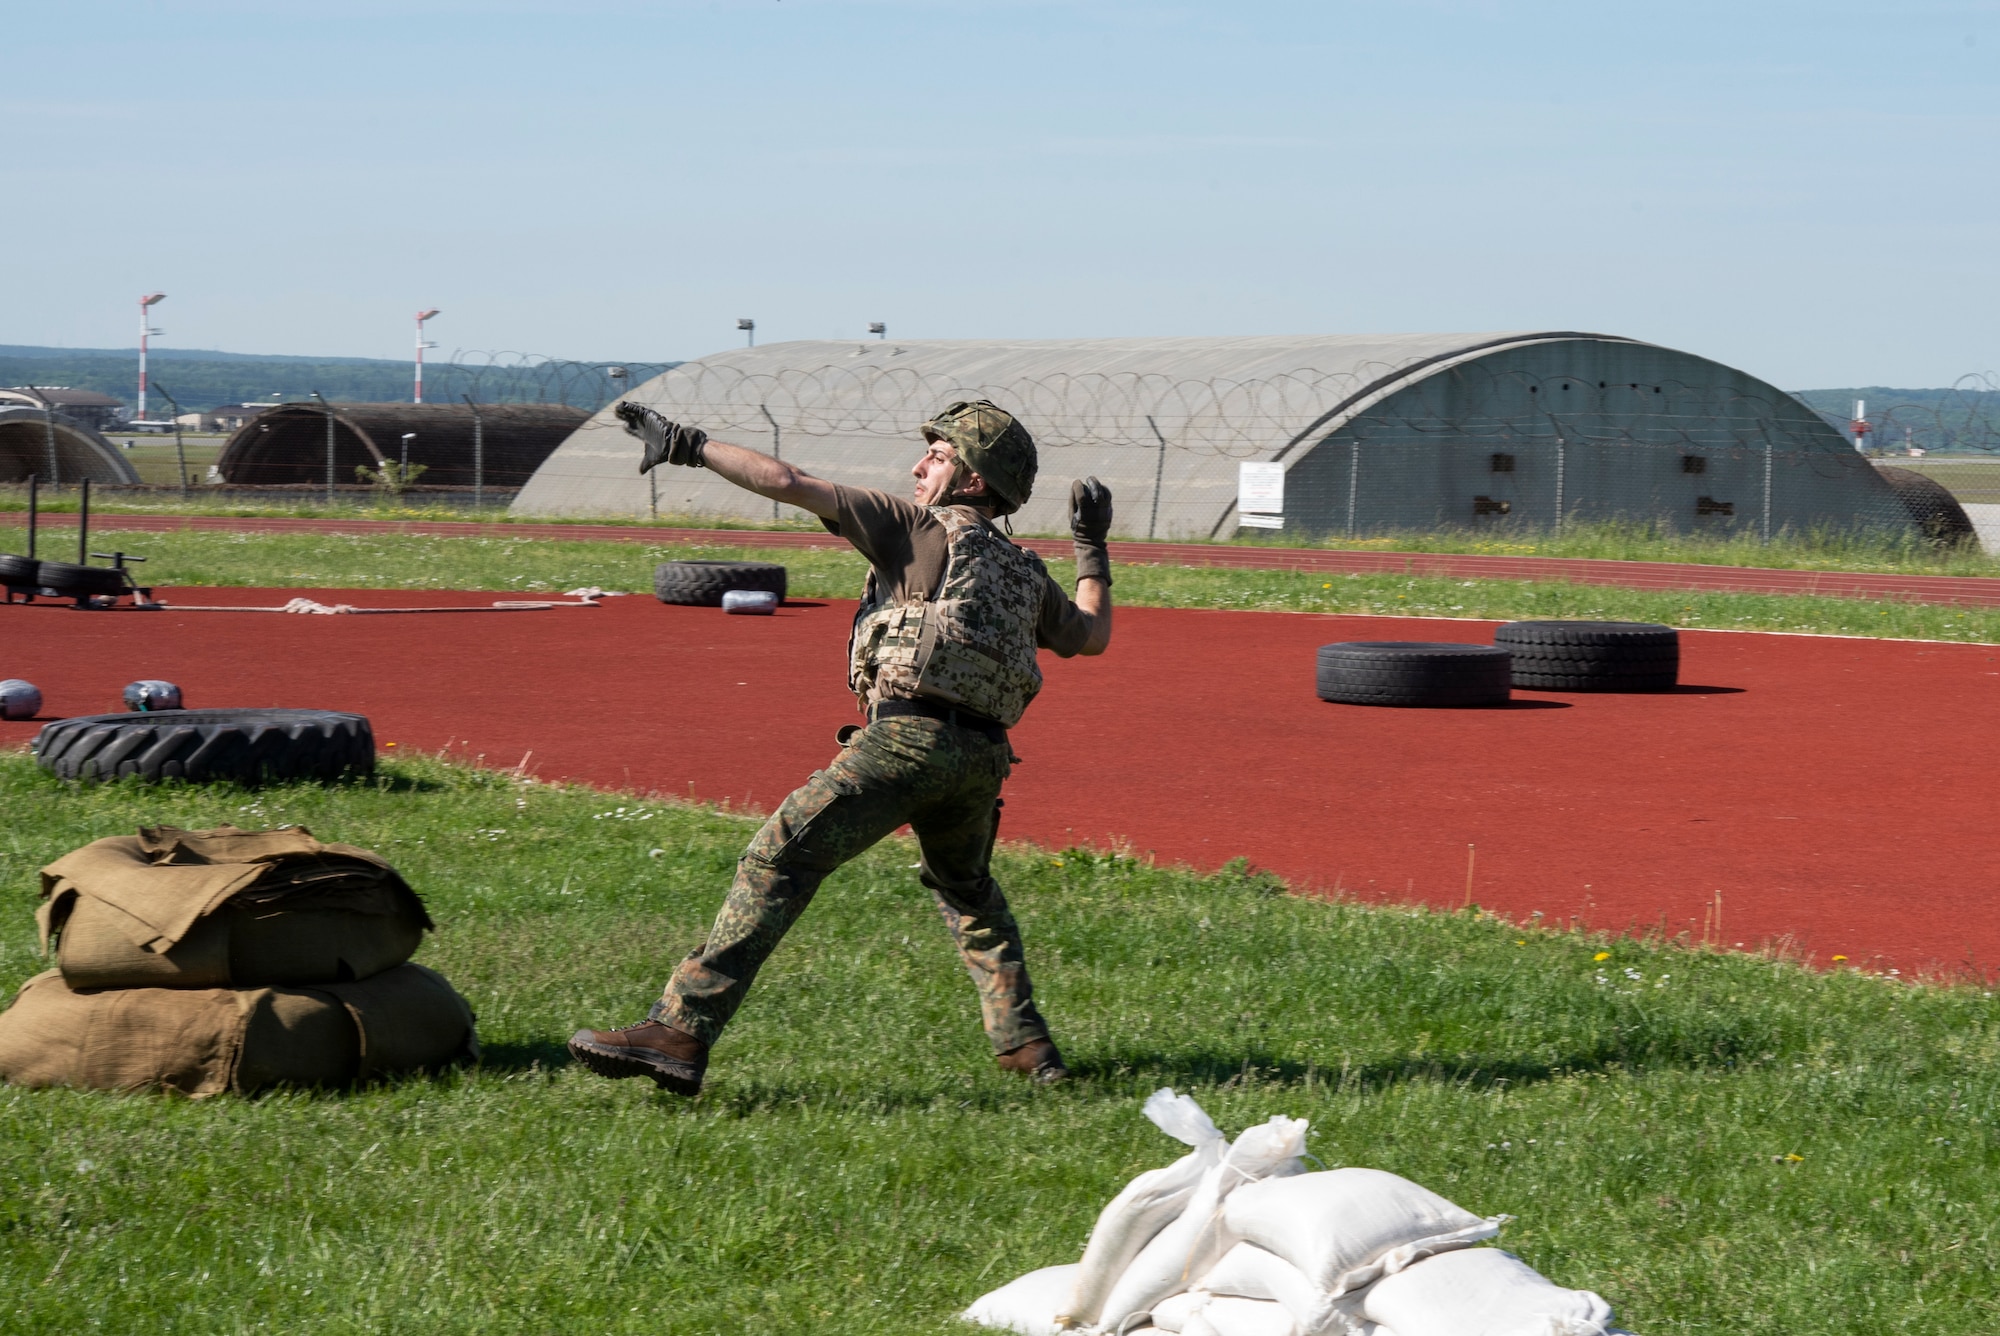 A member of the German Bundeswehr Military Police throws a non-explosive training grenade as part of the Defender Challenge at Spangdahlem Air Base, Germany, June 2, 2021.